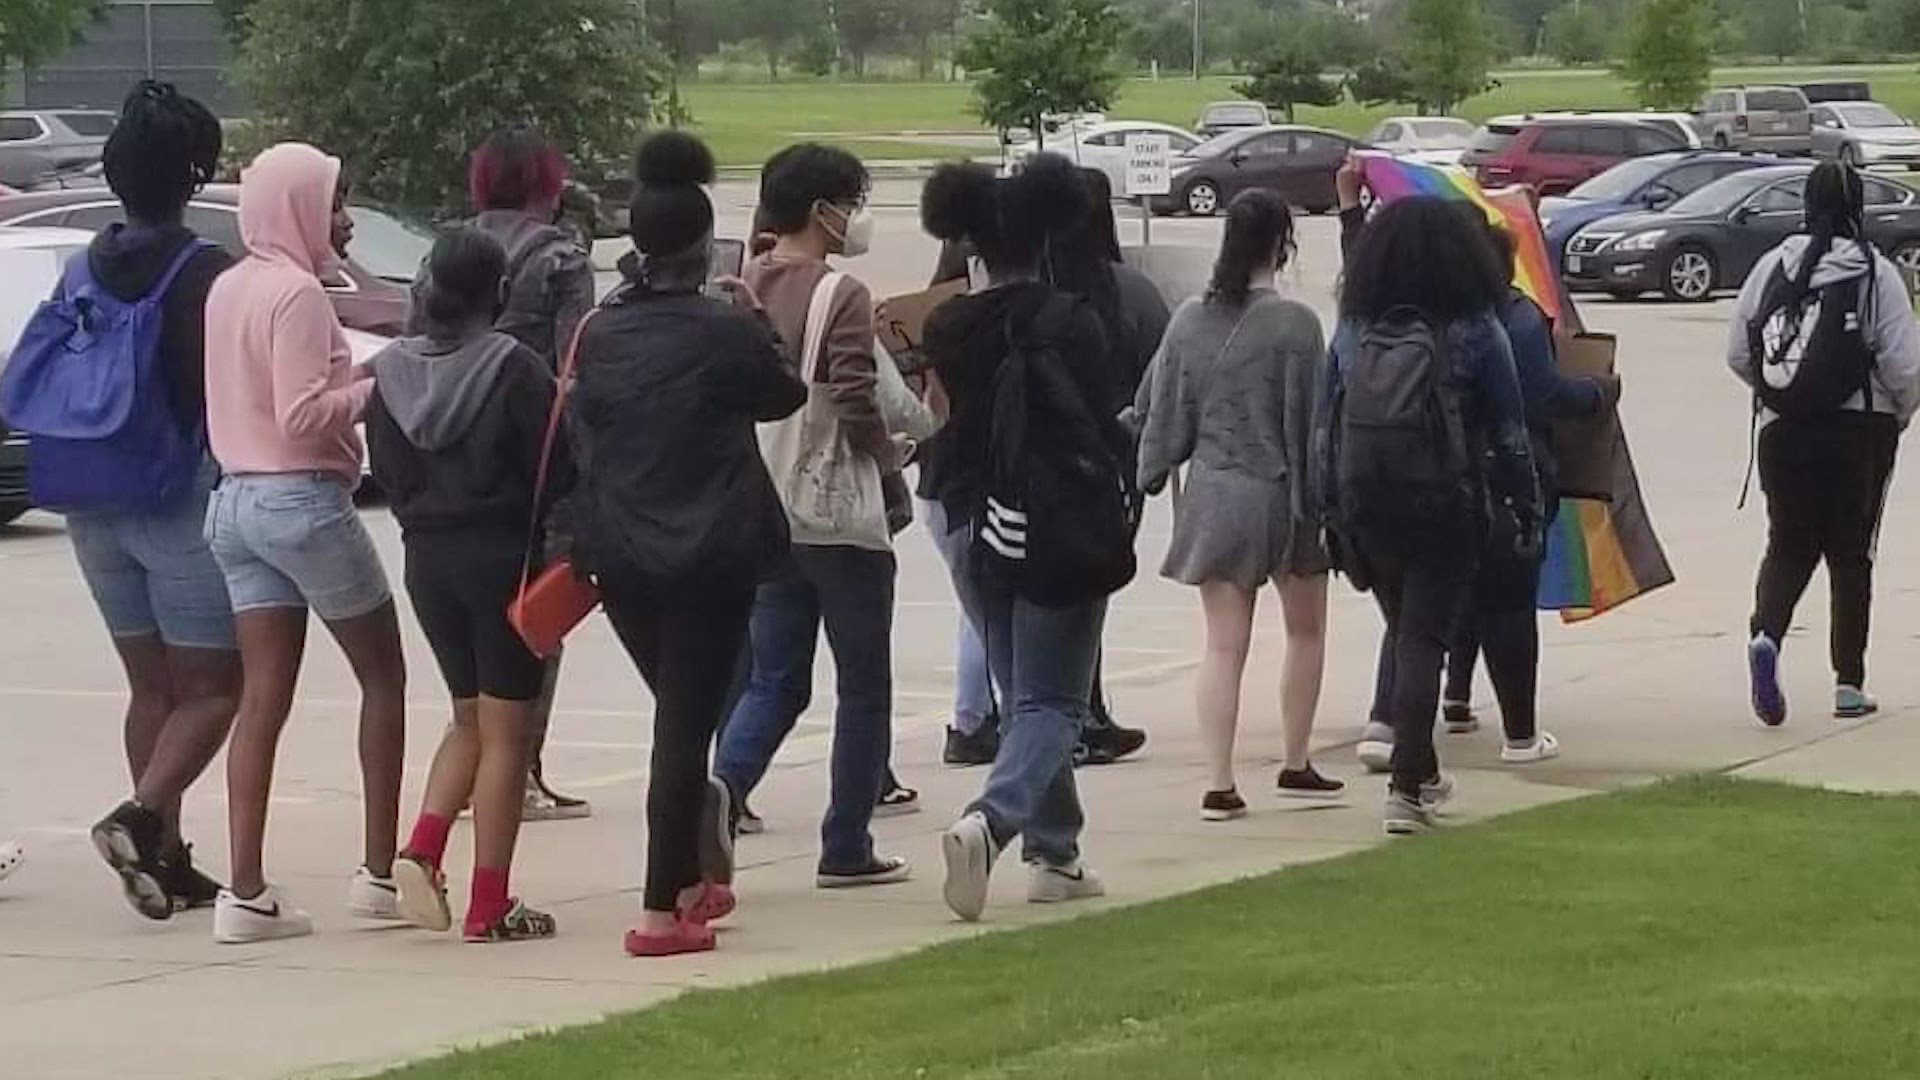 A group of students marched with banners at Horn High School this week. Students say they're protesting disciplinary action taken against a beloved teacher.